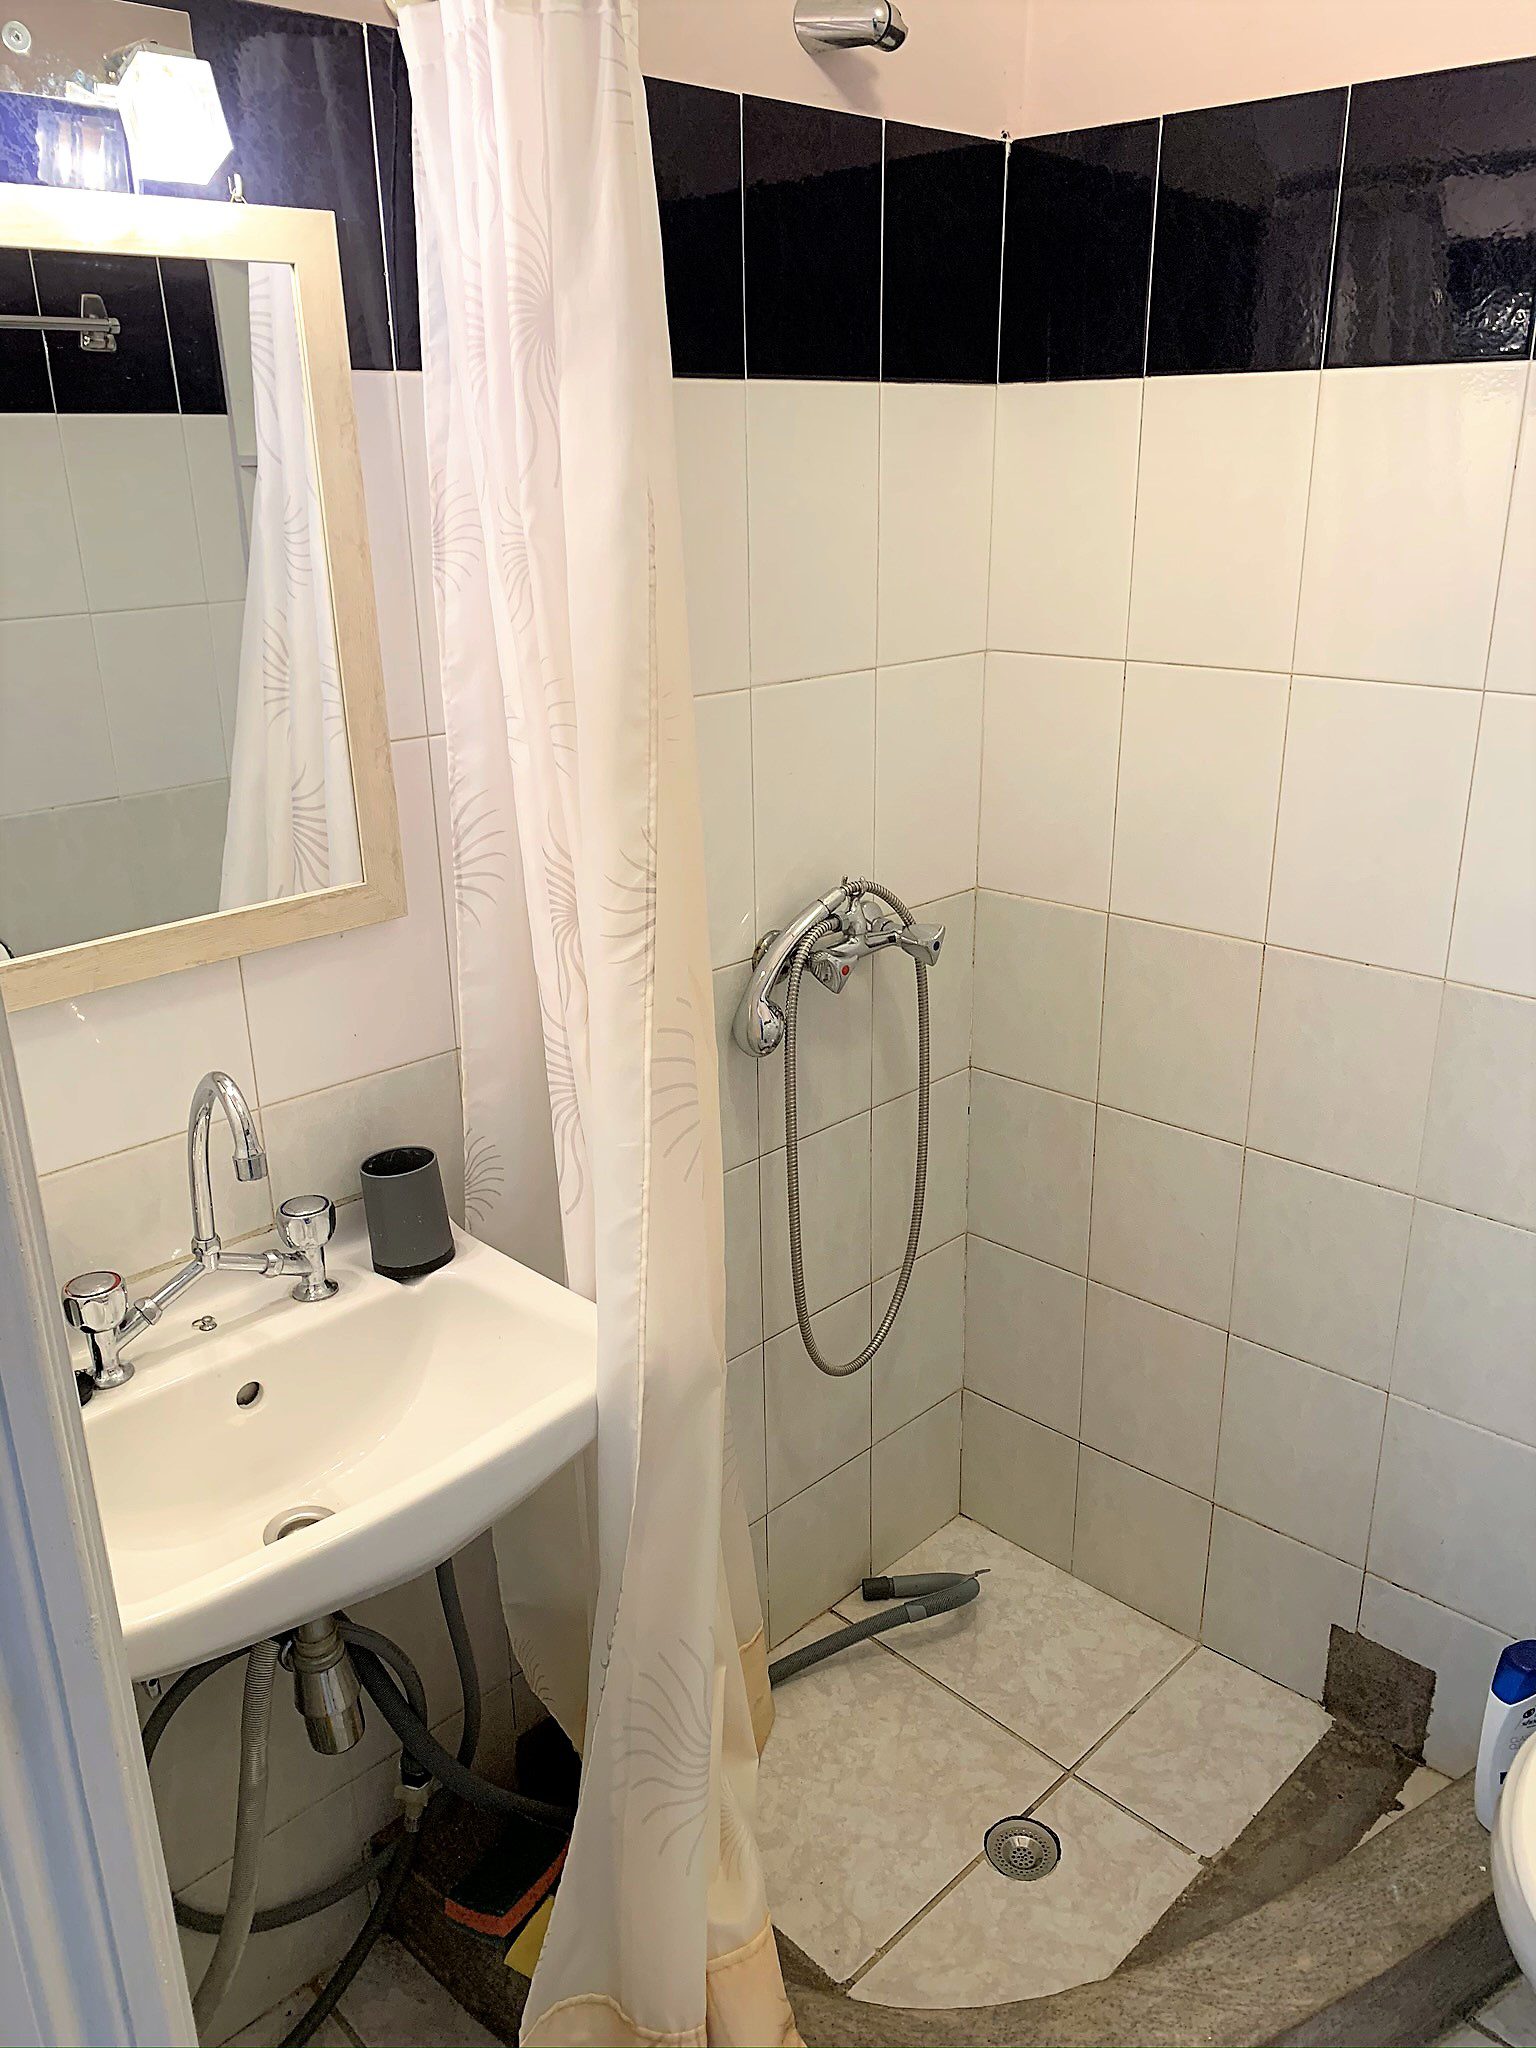 Bathroom of property for sale in Ithaca Greece Vathi